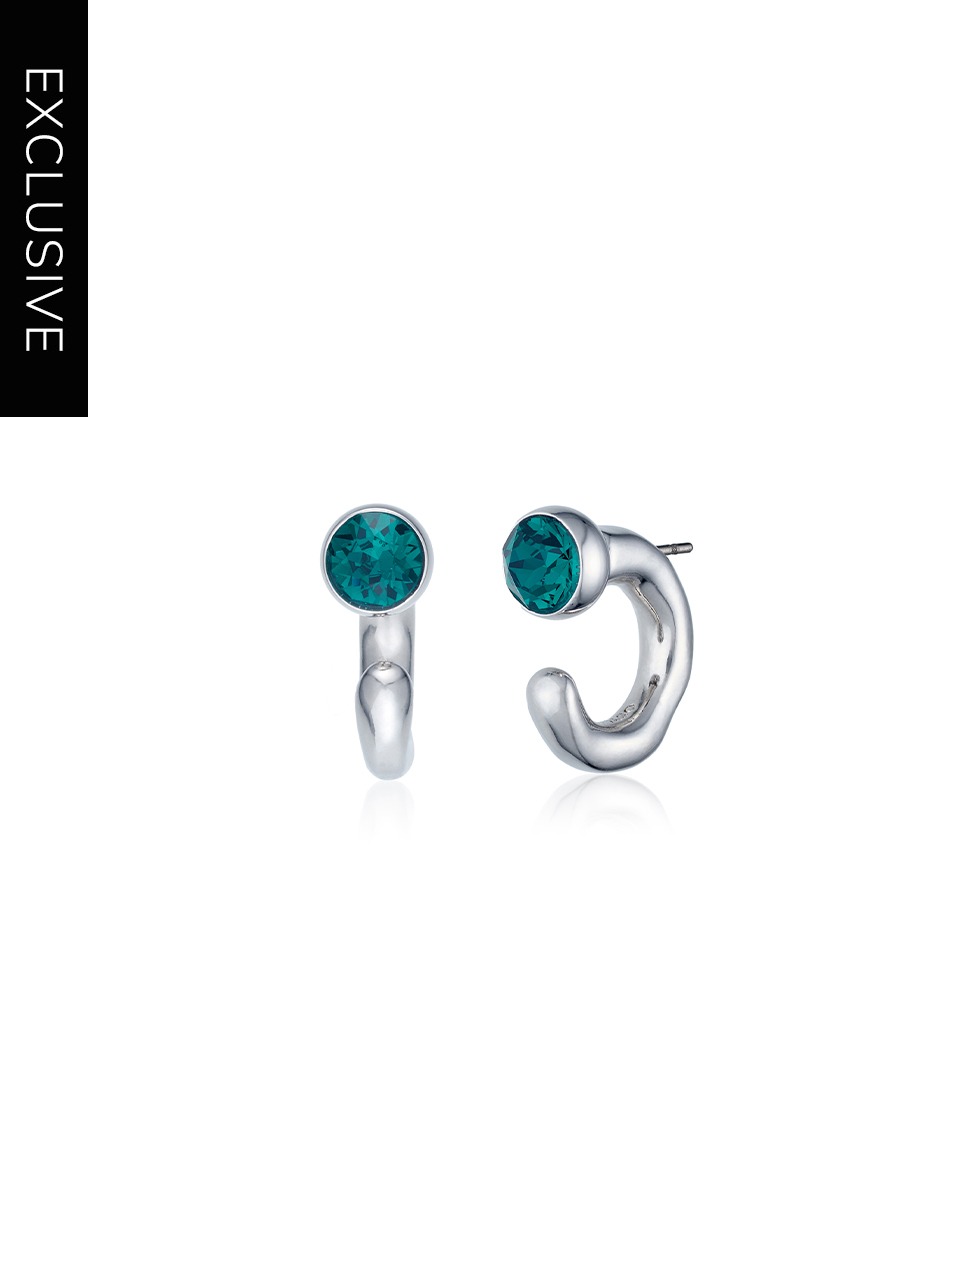 Brill Melting Ring Earring Silver Emerald